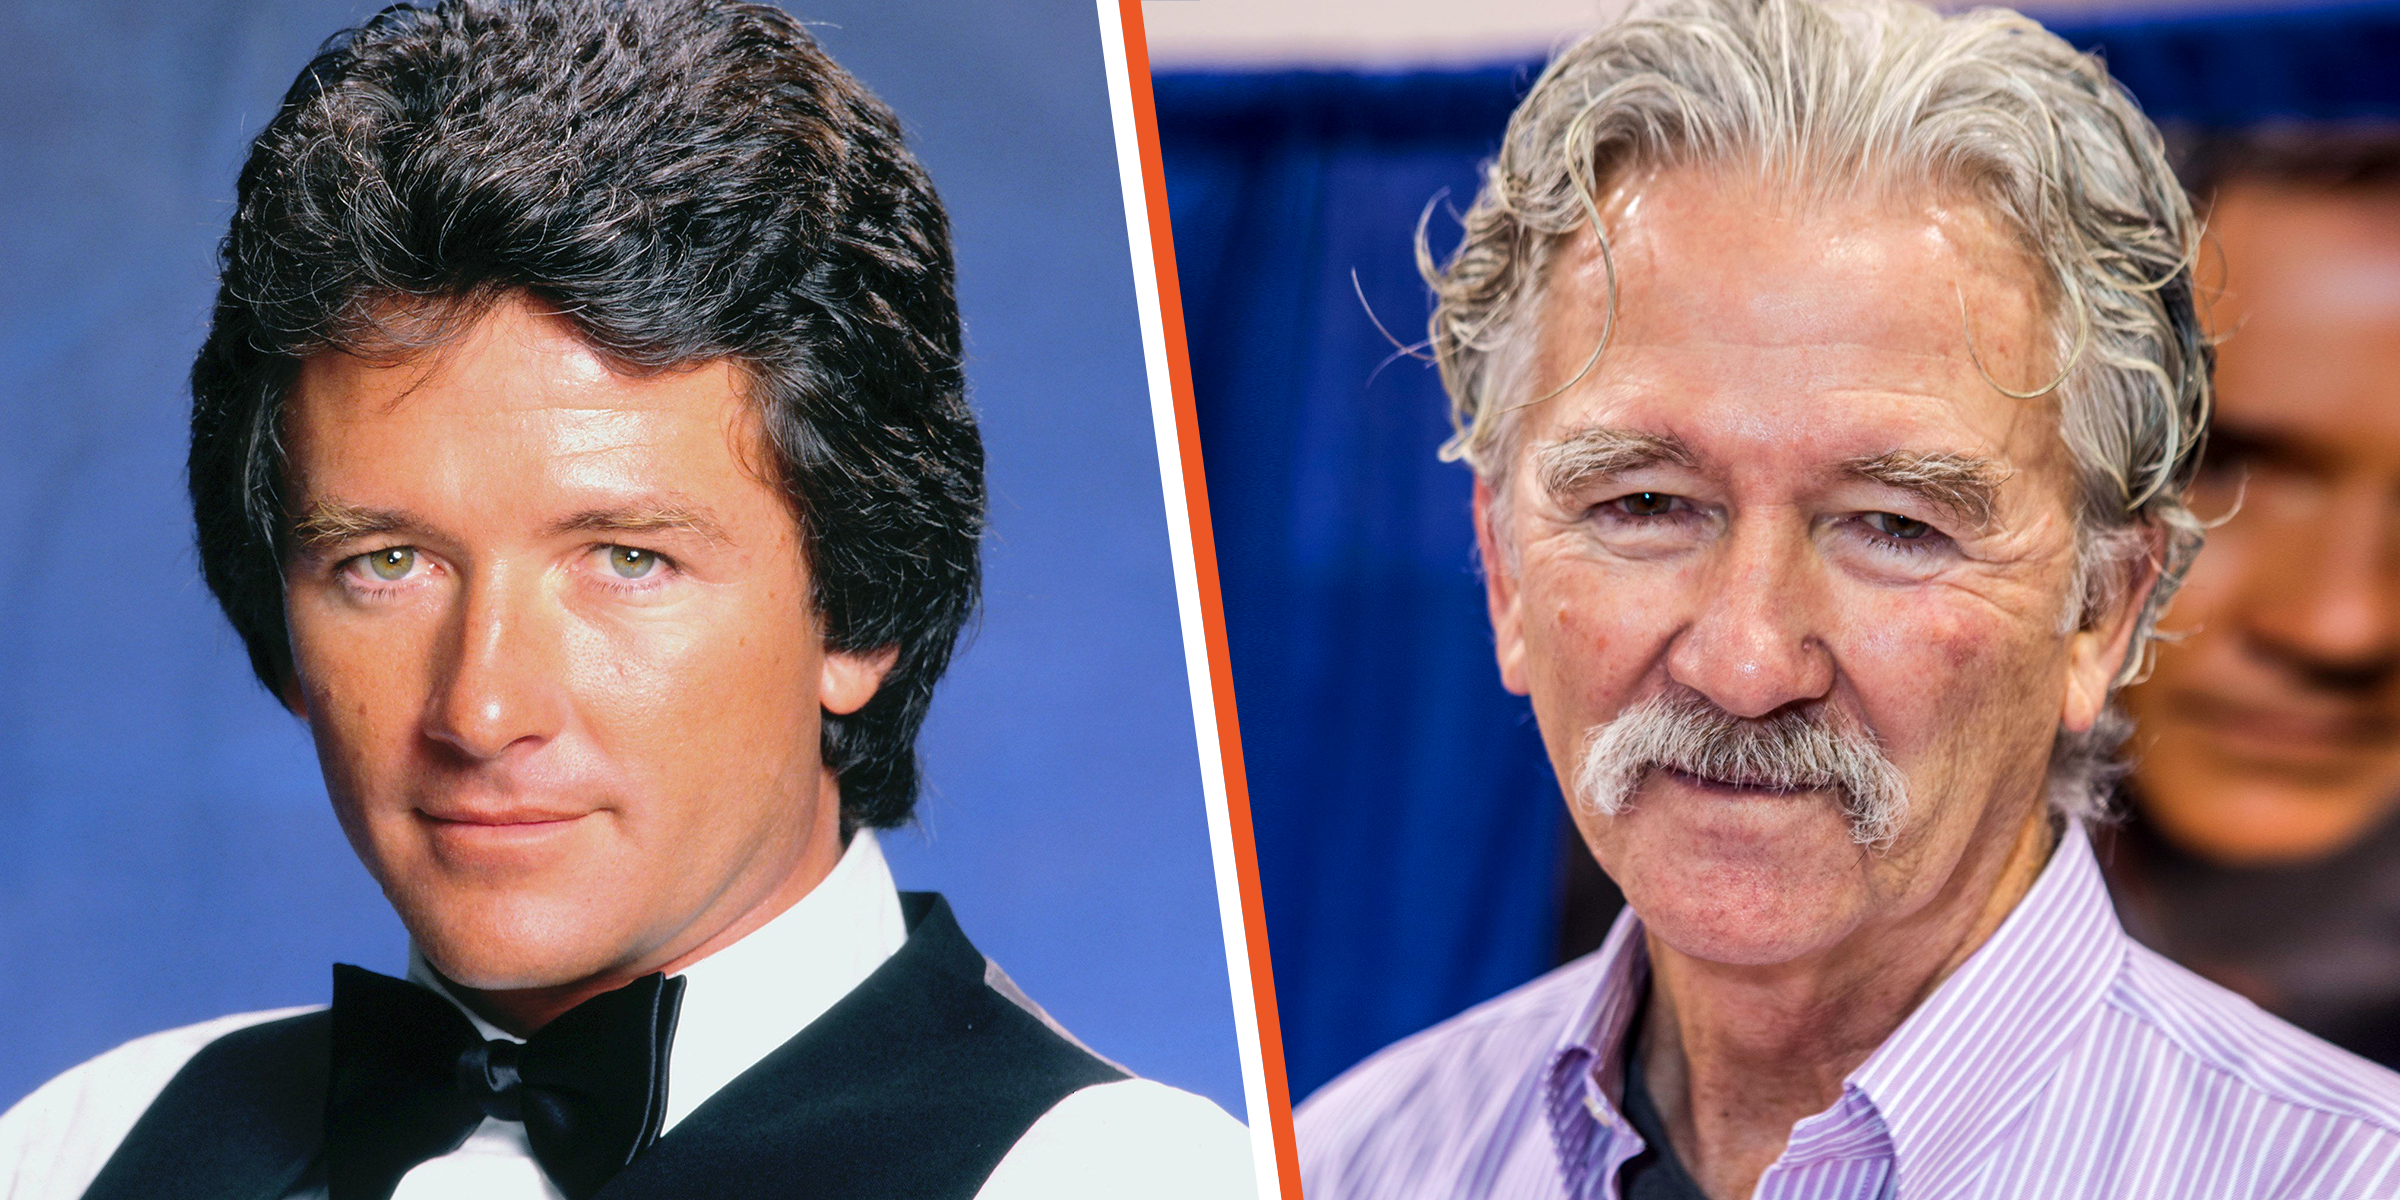 Patrick Duffy, 1990 | Patrick Duffy, 2019 | Source: Getty Images